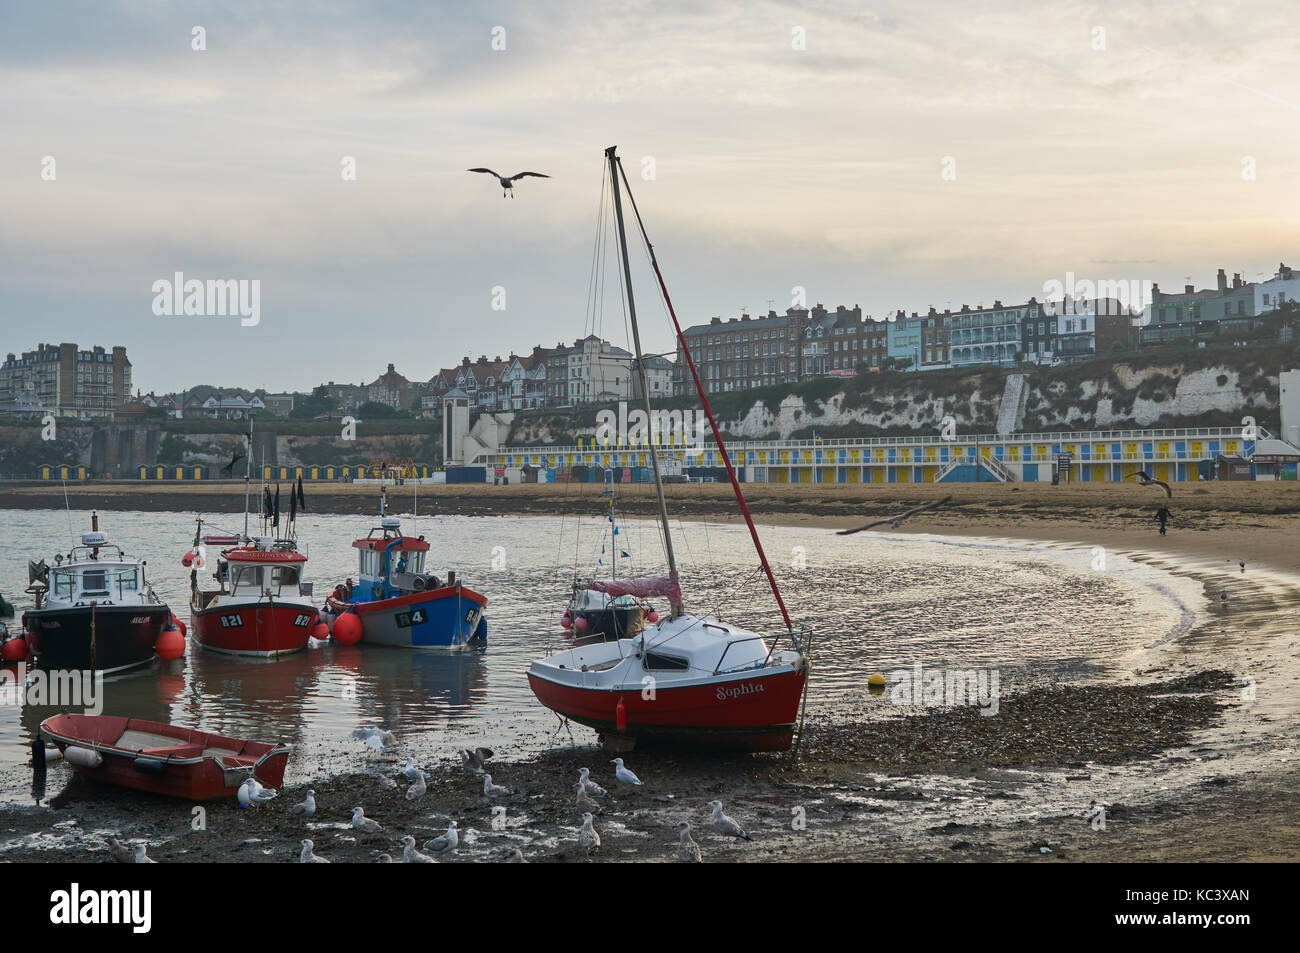 Broadstairs Beach, Thanet, East Kent, UK, in the early evening, with boats and seagulls Stock Photo